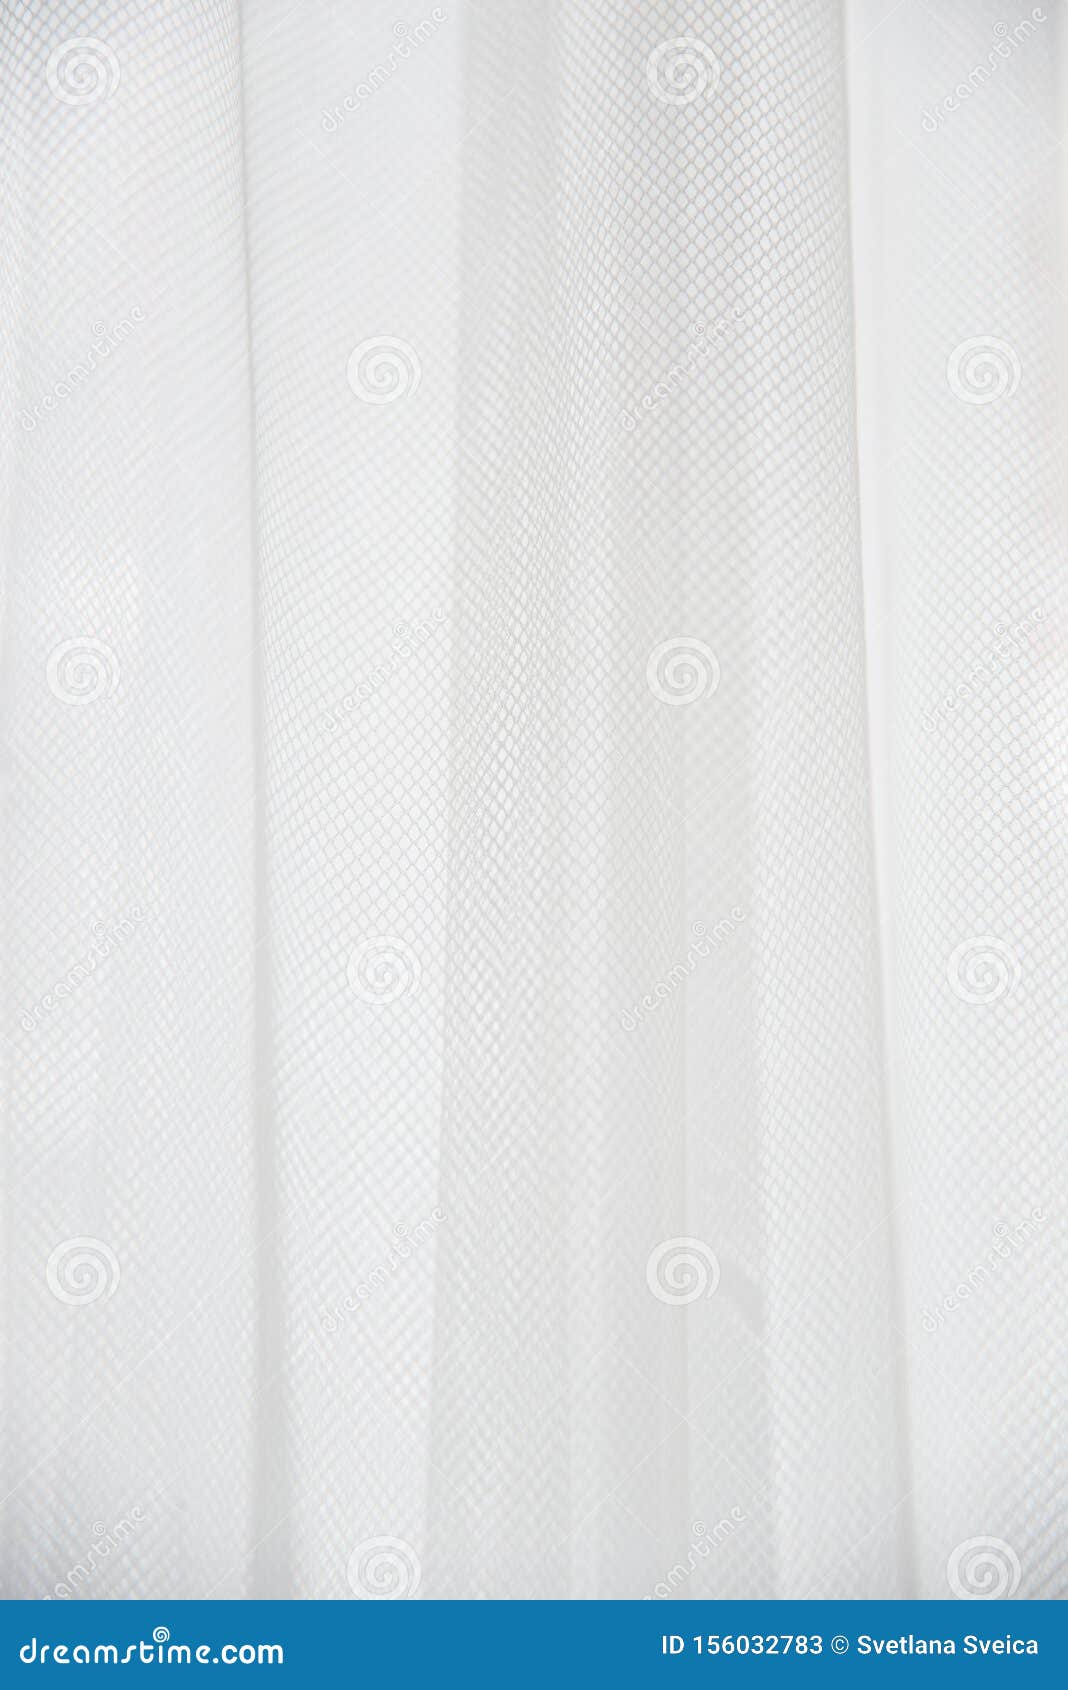 White Tulle Curtain With Vertical Folds. Window With Light Curtains ...